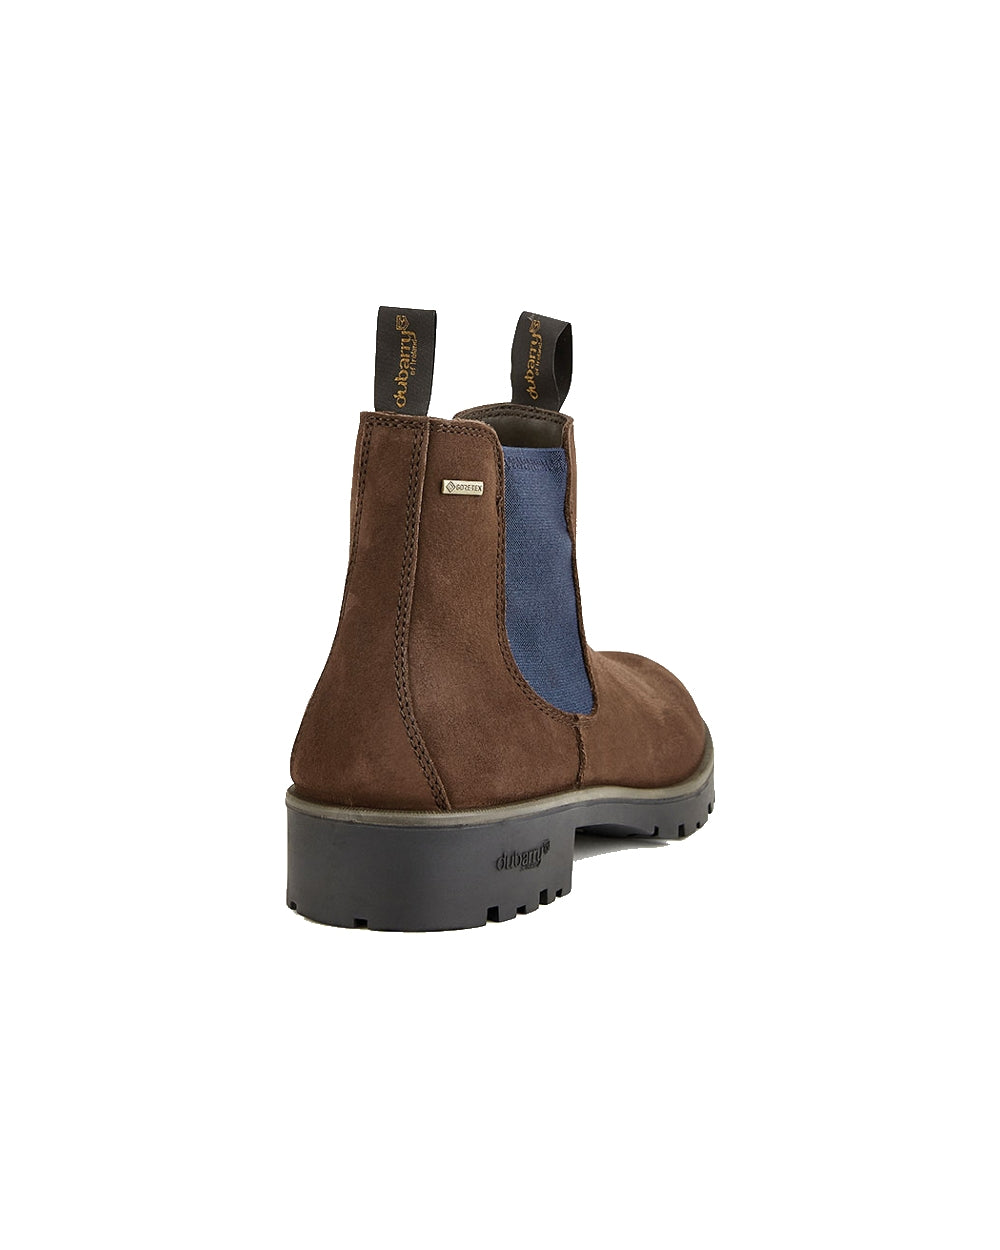 Dubarry Antrim Country Boots in Java 